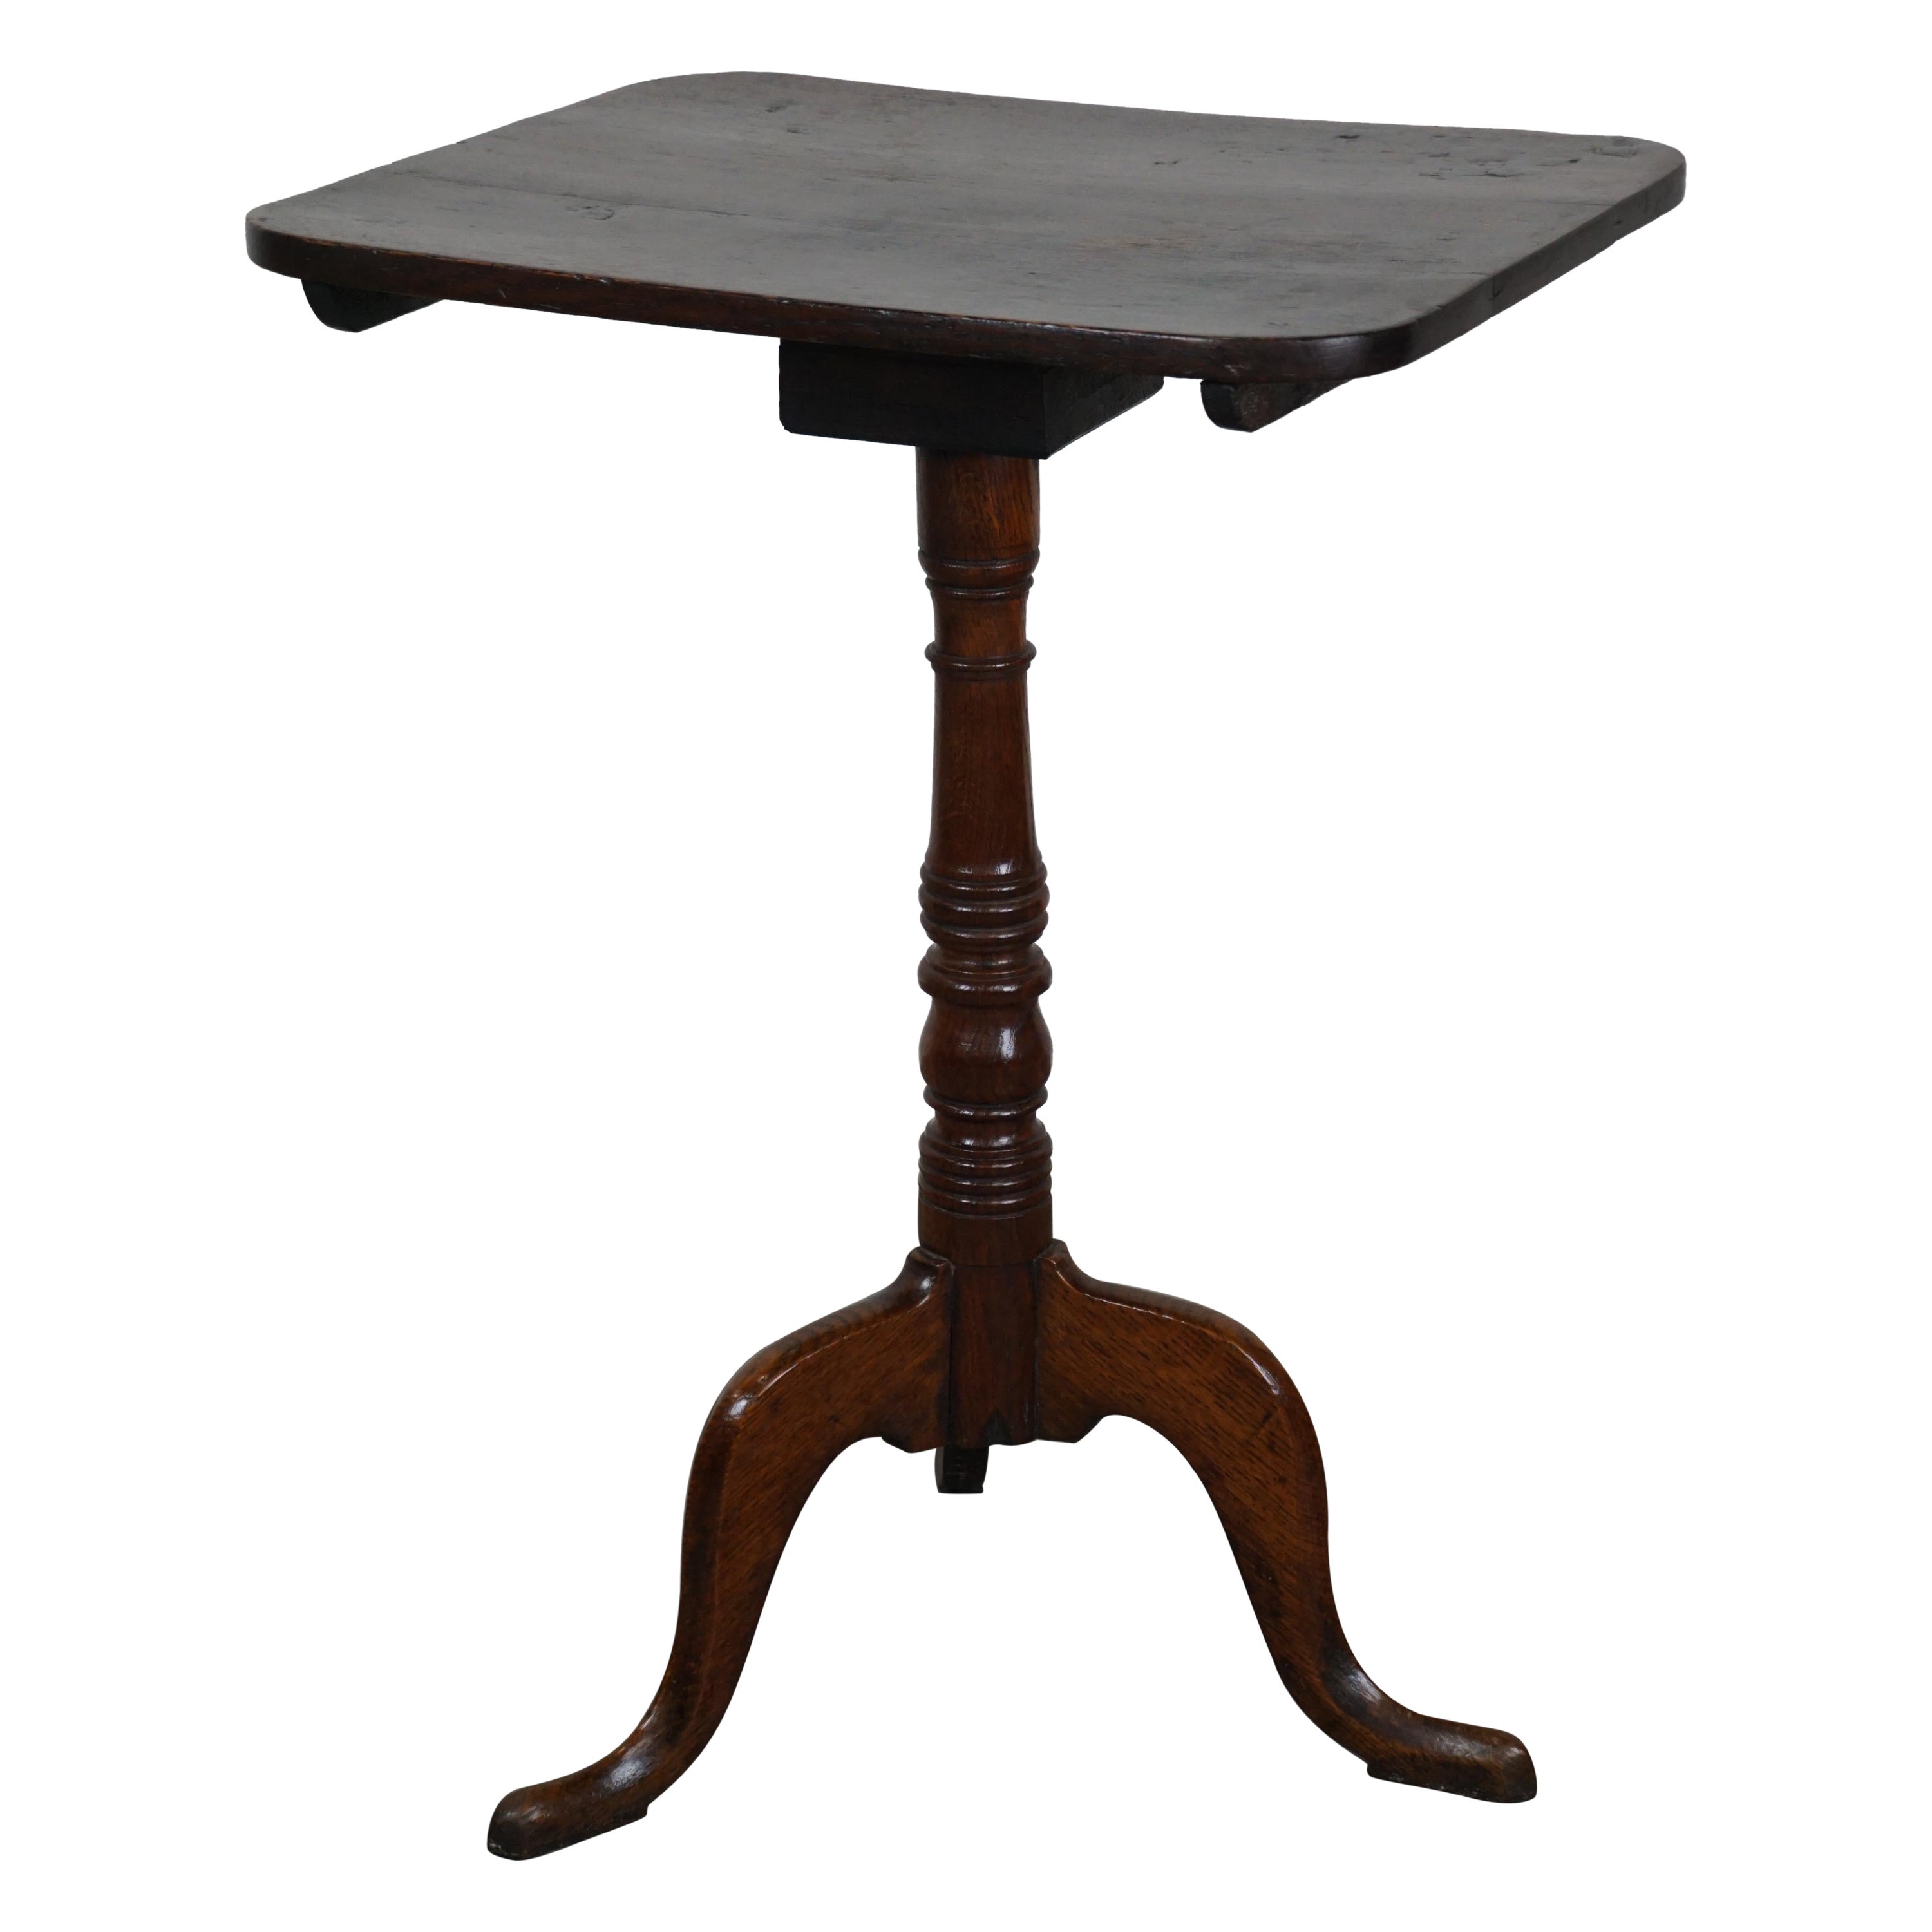 Nice antique English tilt-top table/side table with a square top For Sale